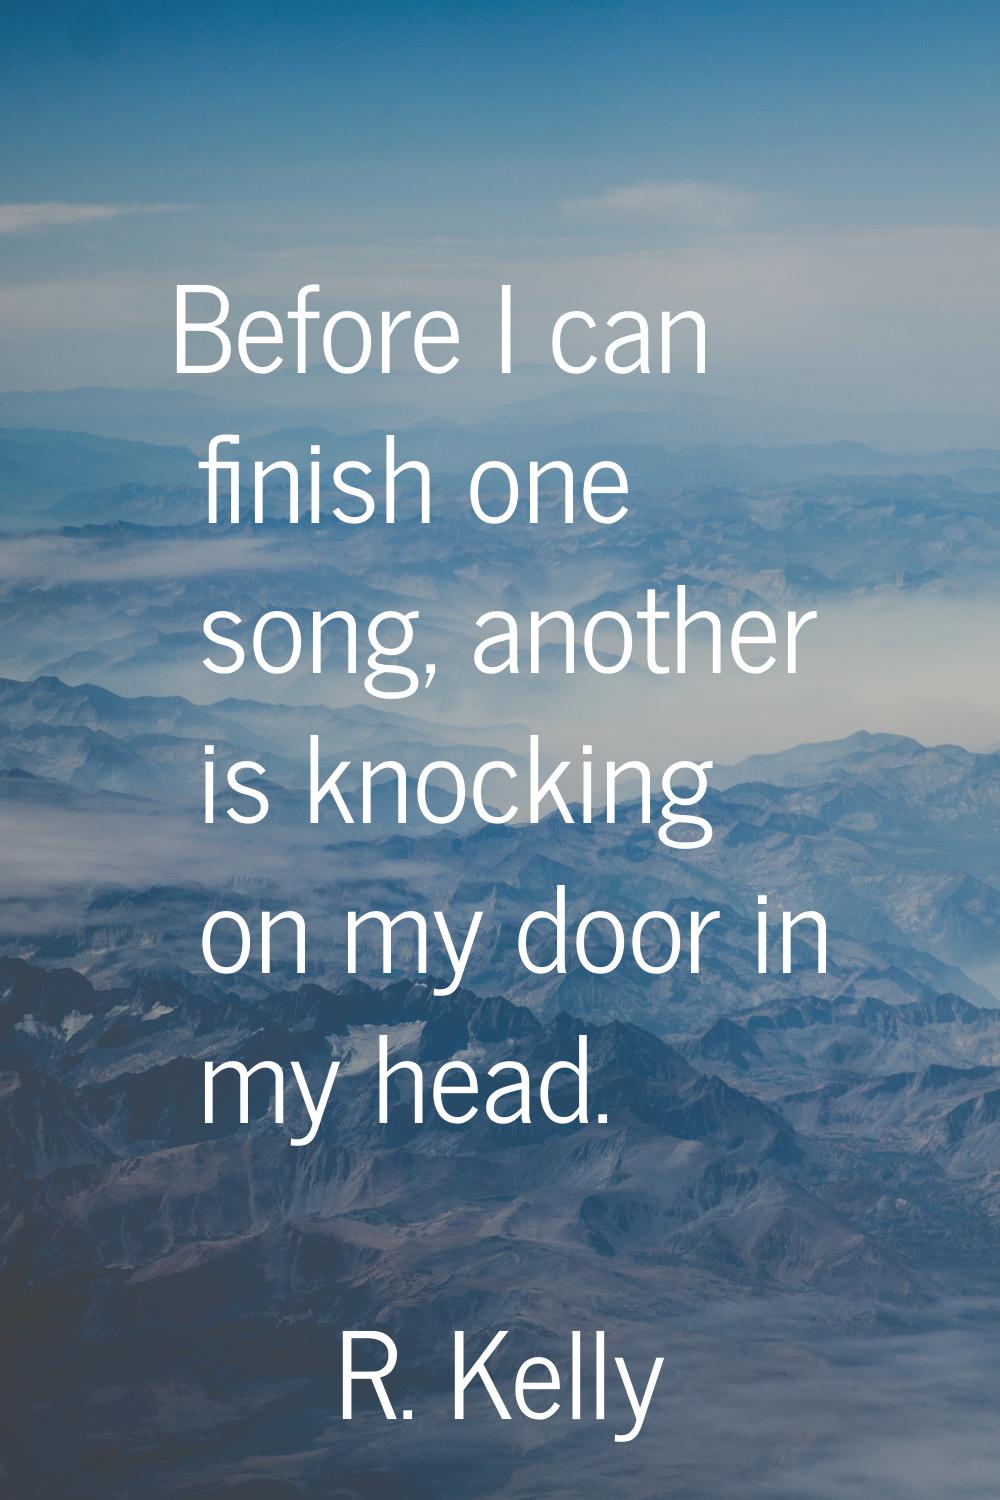 Before I can finish one song, another is knocking on my door in my head.